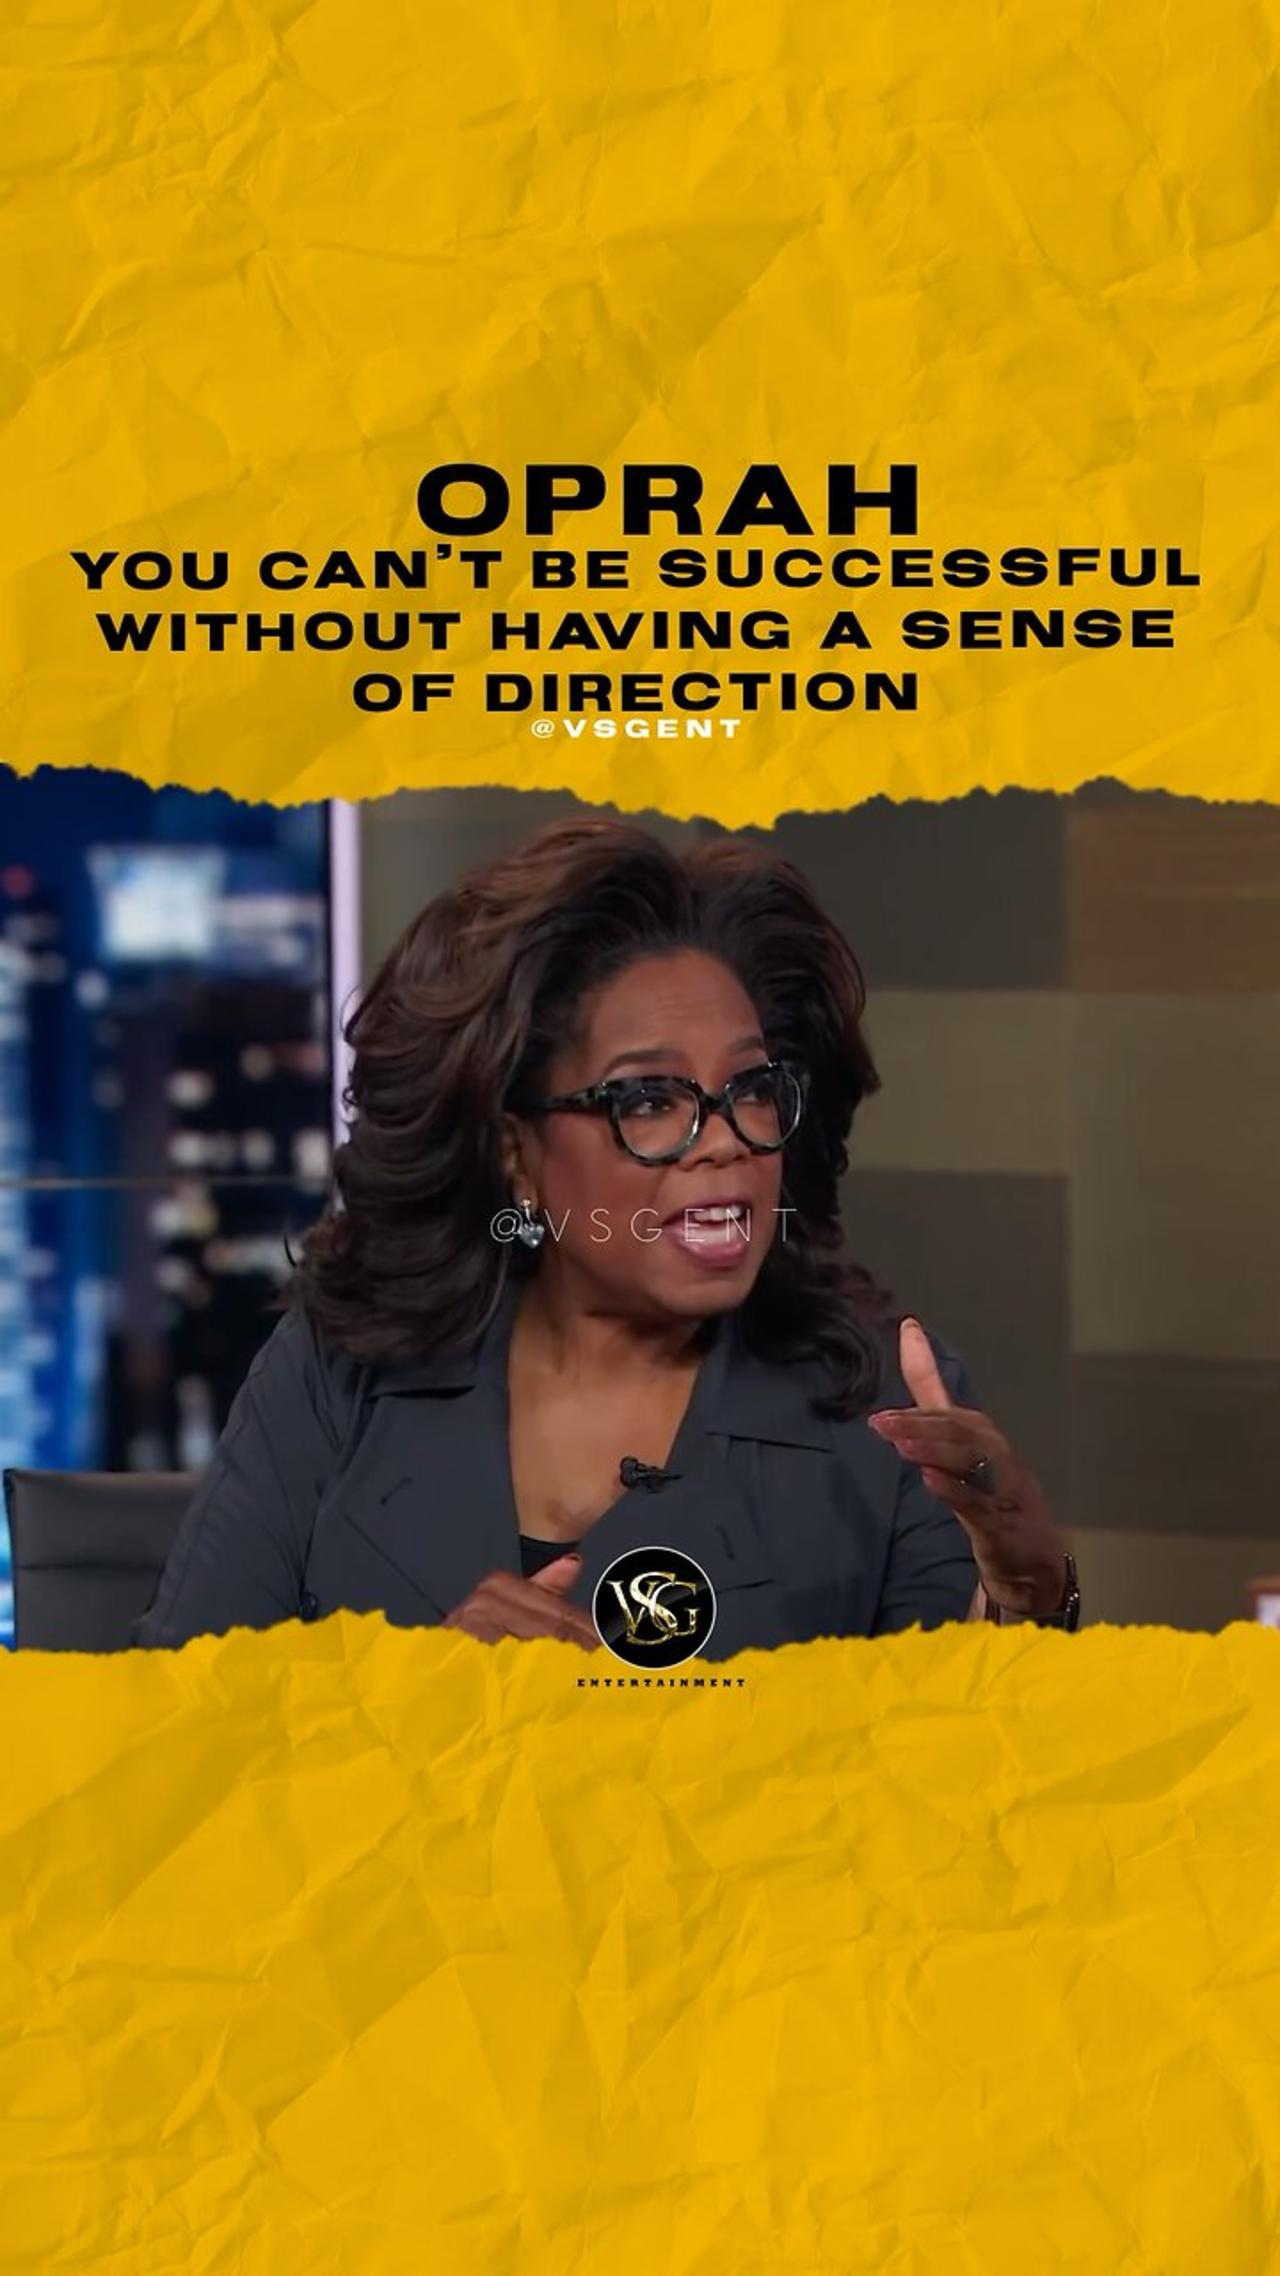 You can’t be successful without having a sense of direction